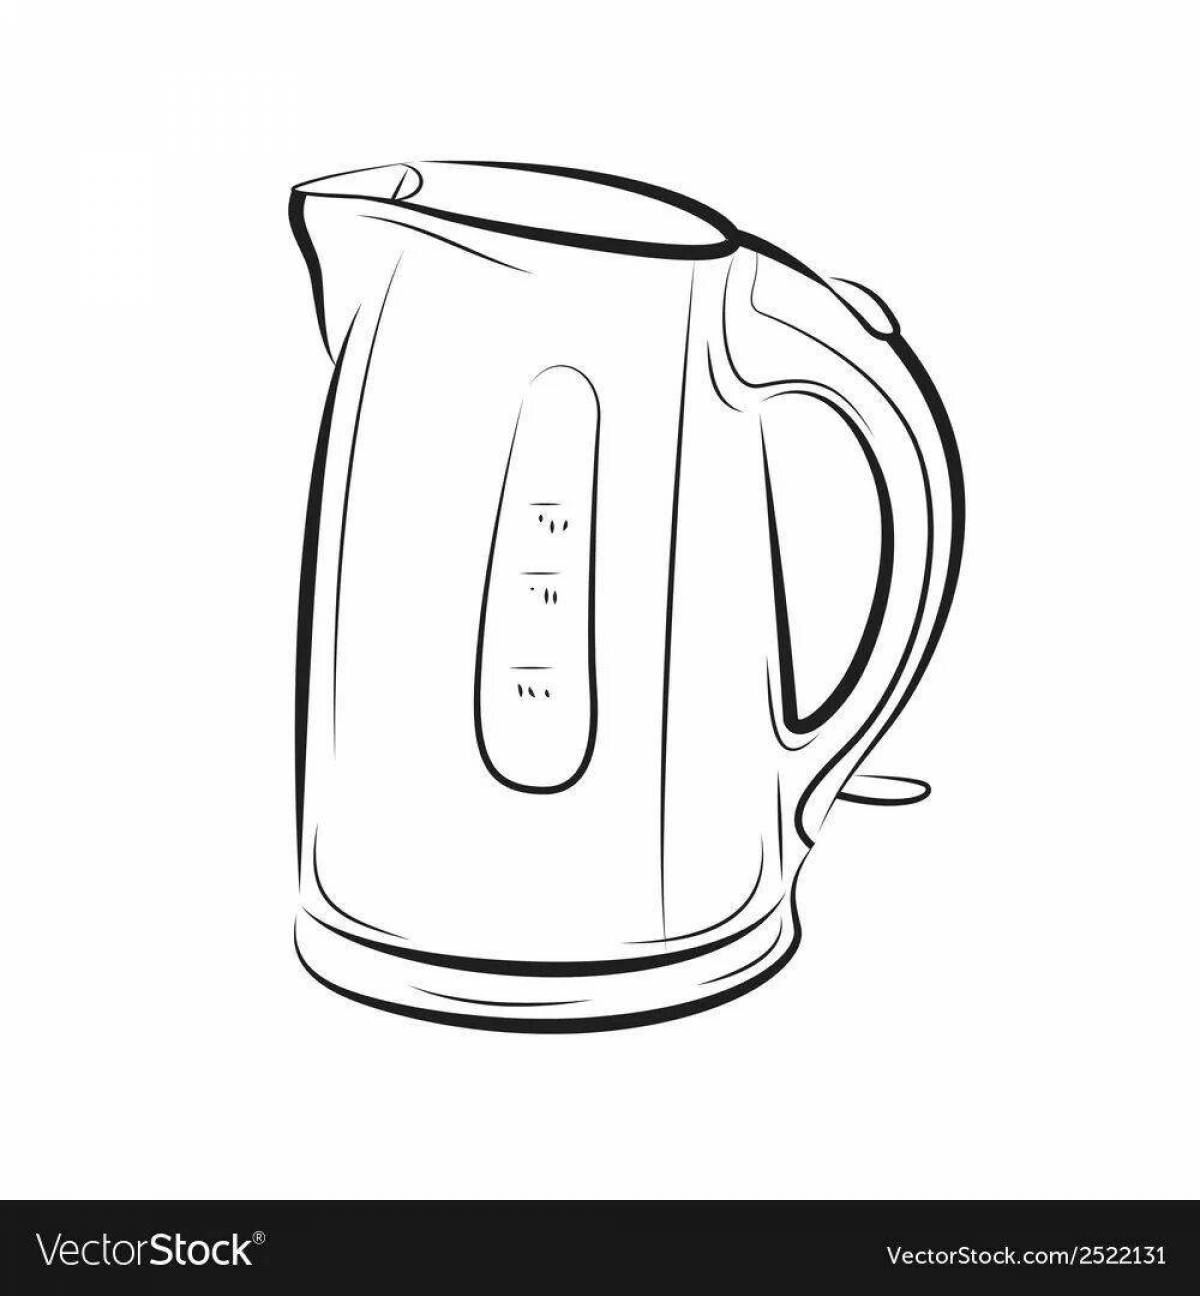 Electric kettle #17